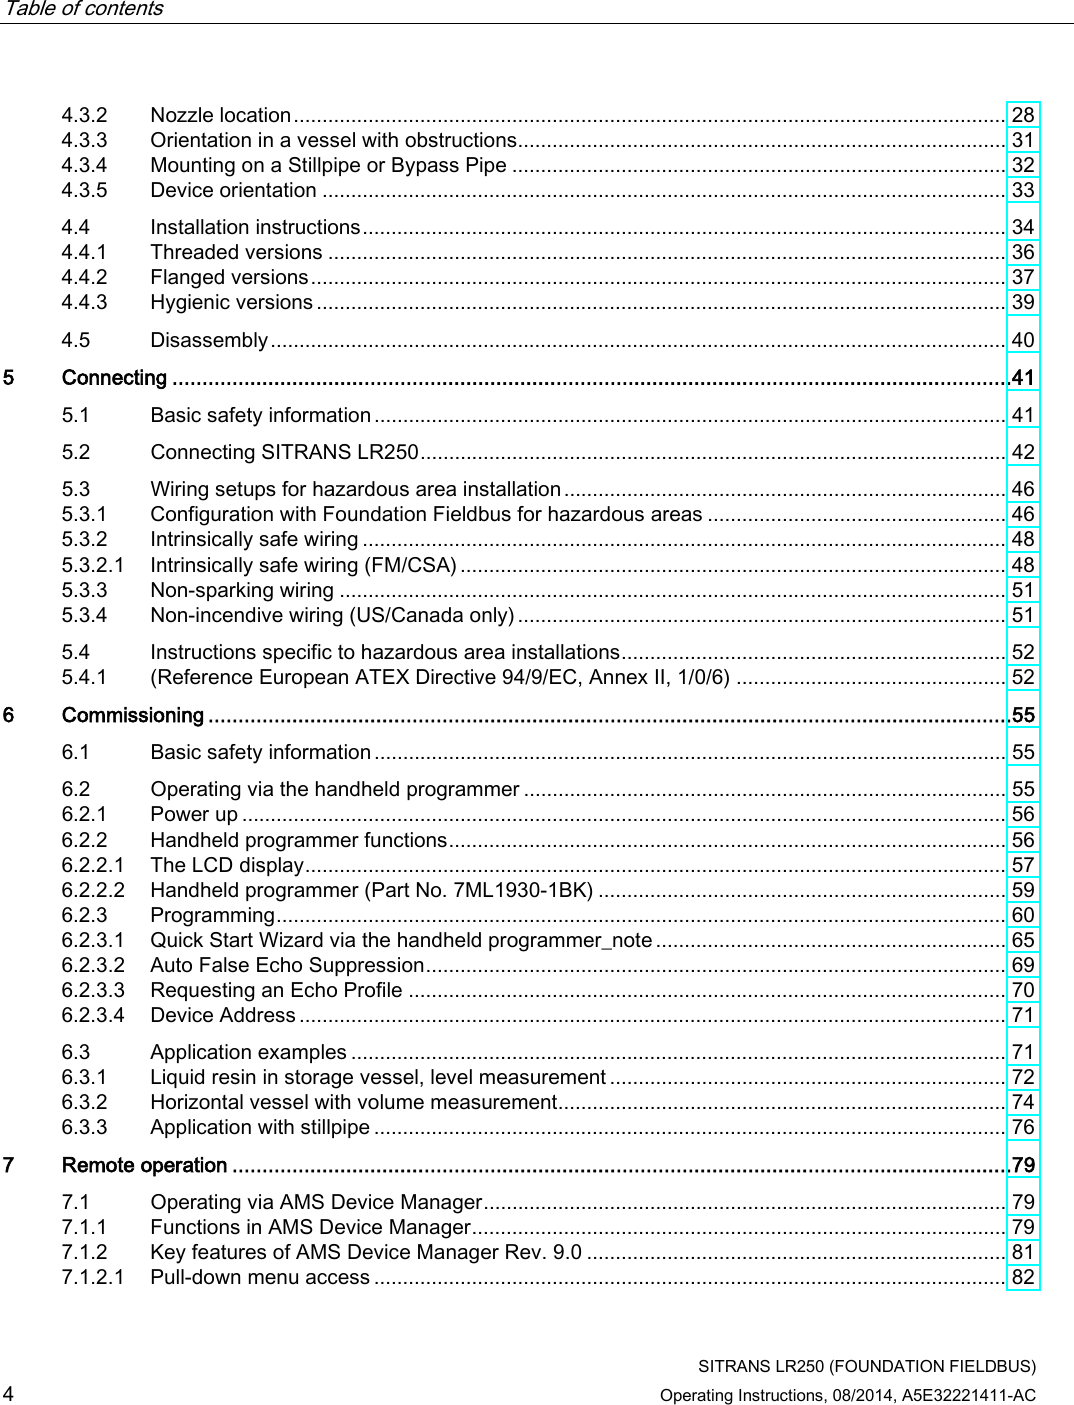 Table of contents      SITRANS LR250 (FOUNDATION FIELDBUS) 4 Operating Instructions, 08/2014, A5E32221411-AC 4.3.2 Nozzle location ............................................................................................................................ 28 4.3.3 Orientation in a vessel with obstructions ..................................................................................... 31 4.3.4 Mounting on a Stillpipe or Bypass Pipe ...................................................................................... 32 4.3.5 Device orientation ....................................................................................................................... 33 4.4 Installation instructions ................................................................................................................ 34 4.4.1 Threaded versions ...................................................................................................................... 36 4.4.2 Flanged versions ......................................................................................................................... 37 4.4.3 Hygienic versions ........................................................................................................................ 39 4.5 Disassembly ................................................................................................................................ 40 5  Connecting ............................................................................................................................................41 5.1 Basic safety information .............................................................................................................. 41 5.2 Connecting SITRANS LR250 ...................................................................................................... 42 5.3 Wiring setups for hazardous area installation ............................................................................. 46 5.3.1 Configuration with Foundation Fieldbus for hazardous areas .................................................... 46 5.3.2 Intrinsically safe wiring ................................................................................................................ 48 5.3.2.1 Intrinsically safe wiring (FM/CSA) ............................................................................................... 48 5.3.3 Non-sparking wiring .................................................................................................................... 51 5.3.4 Non-incendive wiring (US/Canada only) ..................................................................................... 51 5.4 Instructions specific to hazardous area installations ................................................................... 52 5.4.1 (Reference European ATEX Directive 94/9/EC, Annex II, 1/0/6) ............................................... 52 6  Commissioning ......................................................................................................................................55 6.1 Basic safety information .............................................................................................................. 55 6.2 Operating via the handheld programmer .................................................................................... 55 6.2.1 Power up ..................................................................................................................................... 56 6.2.2 Handheld programmer functions ................................................................................................. 56 6.2.2.1 The LCD display .......................................................................................................................... 57 6.2.2.2 Handheld programmer (Part No. 7ML1930-1BK) ....................................................................... 59 6.2.3 Programming ............................................................................................................................... 60 6.2.3.1 Quick Start Wizard via the handheld programmer_note ............................................................. 65 6.2.3.2 Auto False Echo Suppression ..................................................................................................... 69 6.2.3.3 Requesting an Echo Profile ........................................................................................................ 70 6.2.3.4 Device Address ........................................................................................................................... 71 6.3 Application examples .................................................................................................................. 71 6.3.1 Liquid resin in storage vessel, level measurement ..................................................................... 72 6.3.2 Horizontal vessel with volume measurement.............................................................................. 74 6.3.3 Application with stillpipe .............................................................................................................. 76 7  Remote operation ..................................................................................................................................79 7.1 Operating via AMS Device Manager ........................................................................................... 79 7.1.1 Functions in AMS Device Manager ............................................................................................. 79 7.1.2 Key features of AMS Device Manager Rev. 9.0 ......................................................................... 81 7.1.2.1 Pull-down menu access .............................................................................................................. 82 